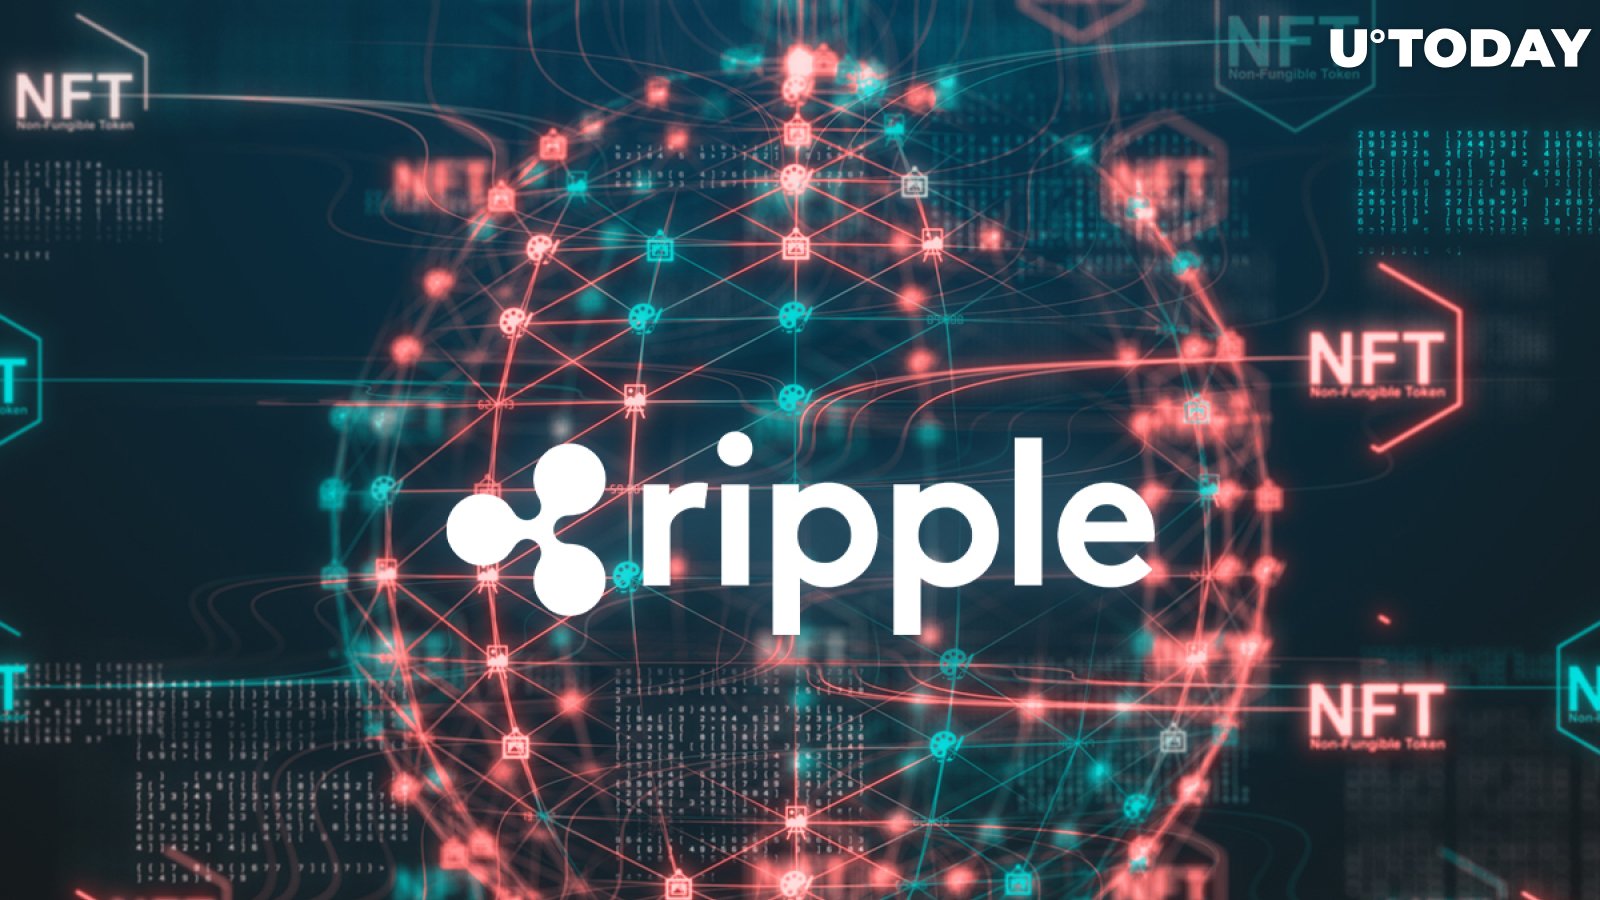 Ripple Makes Foray Into NFTs with $250 Million Fund for Creators